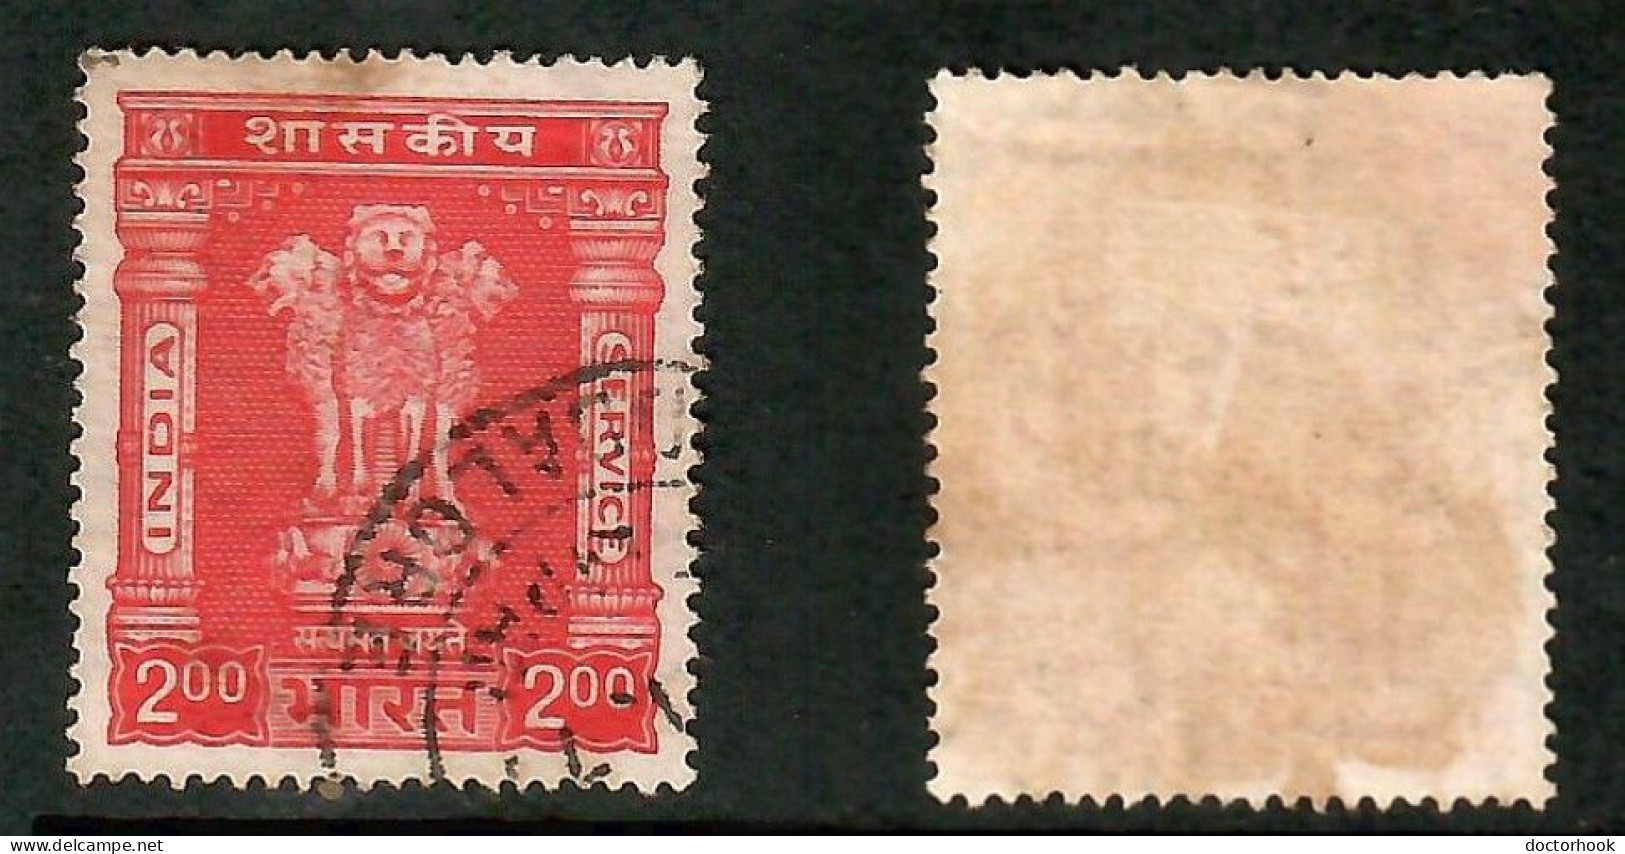 INDIA   Scott # O 183 USED (CONDITION AS PER SCAN) (Stamp Scan # 991-6) - Official Stamps